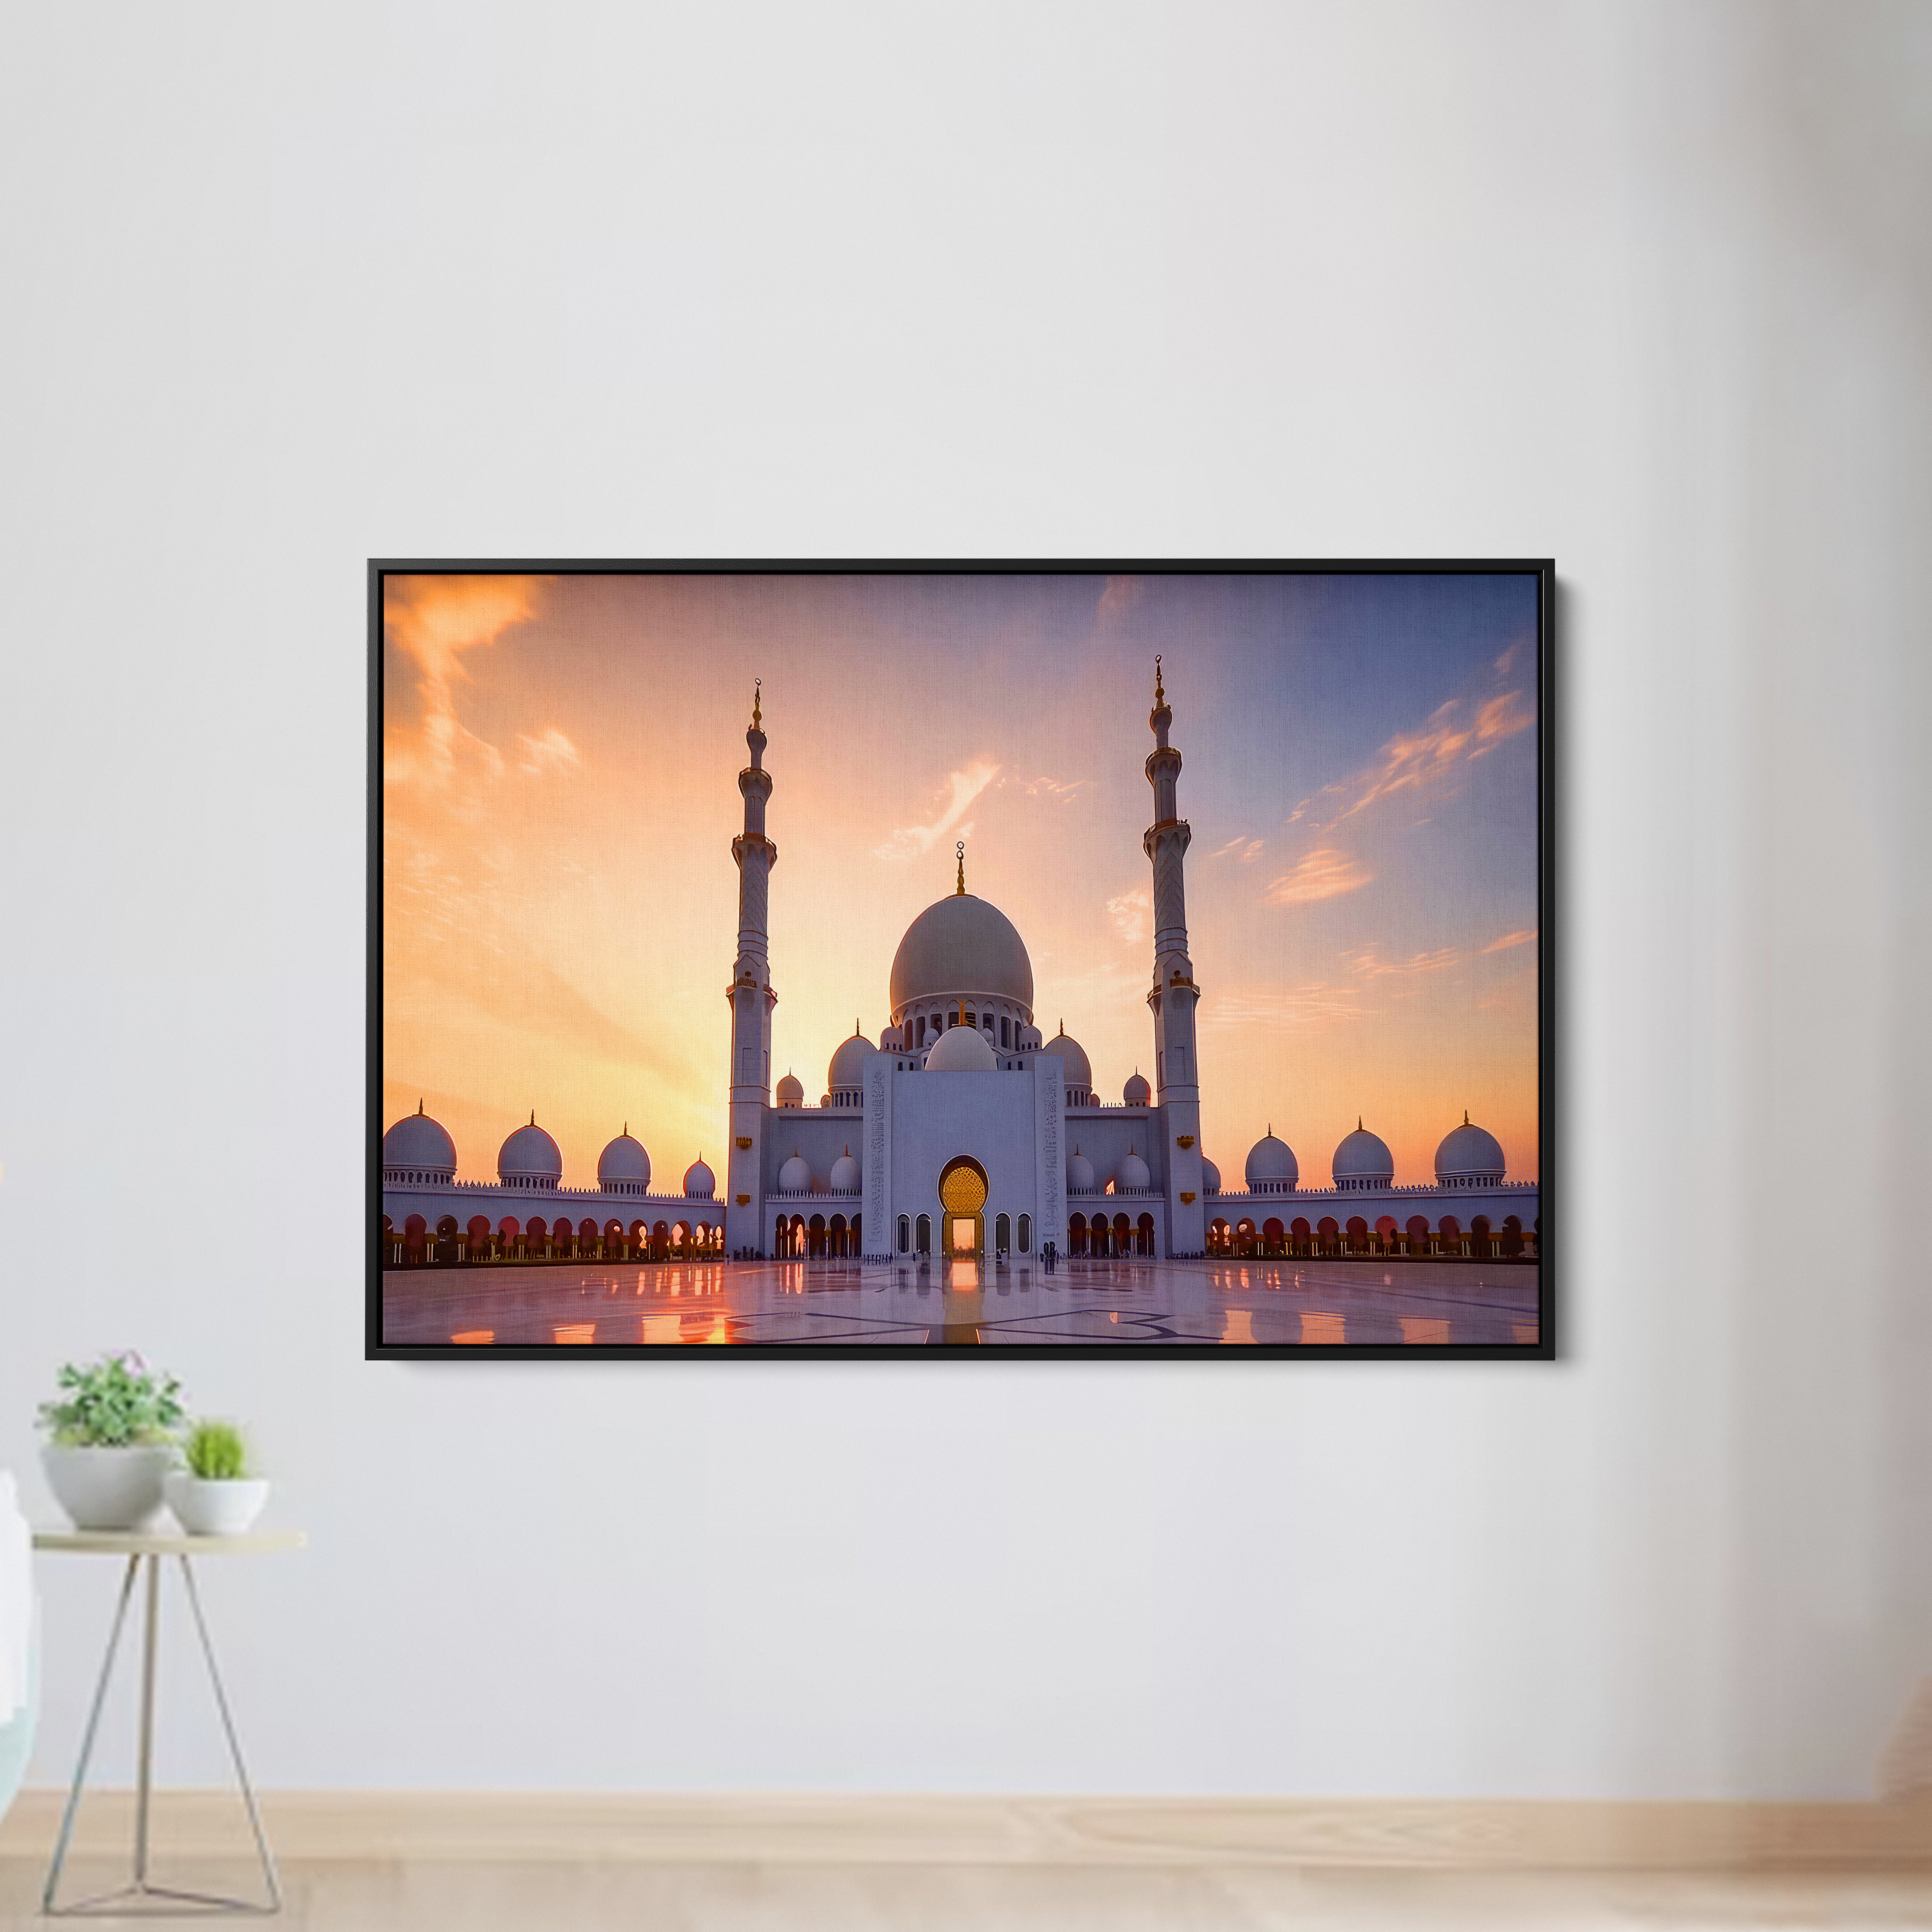 Sheik Zayid Mosque Canvas Wall Painting